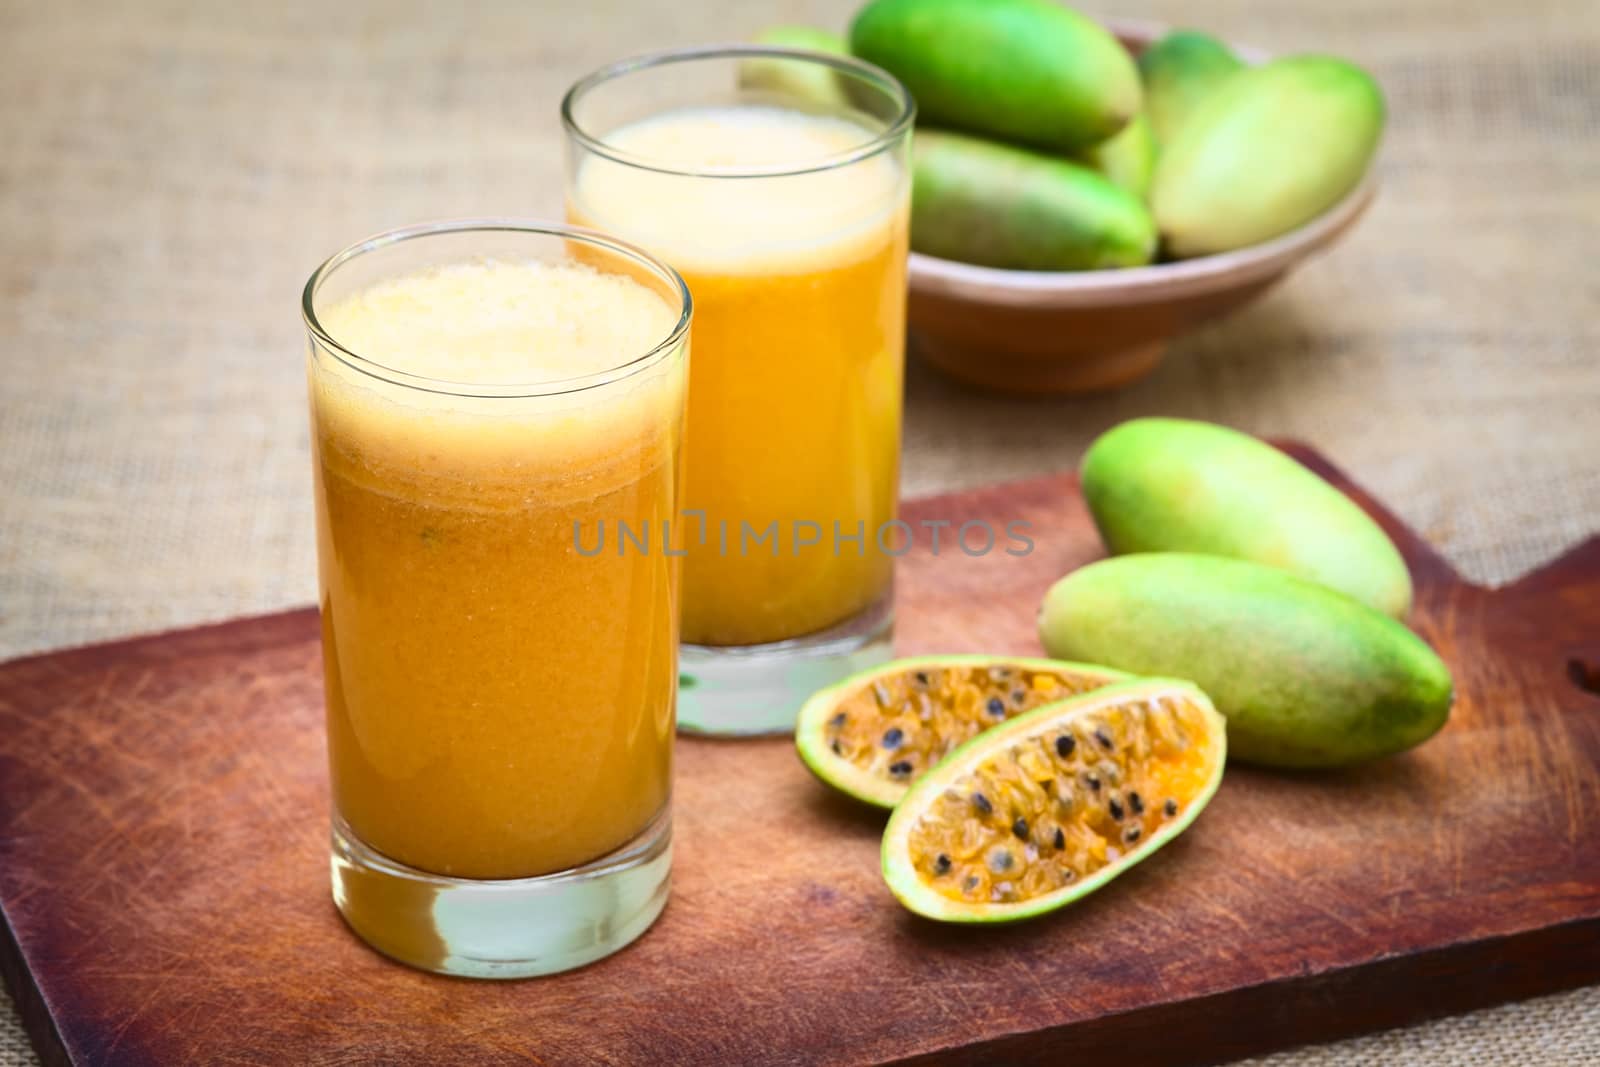 Fresh juice made of the Latin American fruit called banana passionfruit (lat. Passiflora tripartita) (in Spanish mostly tumbo, curuba, taxo) (Selective Focus, Focus on the front of the first glass)